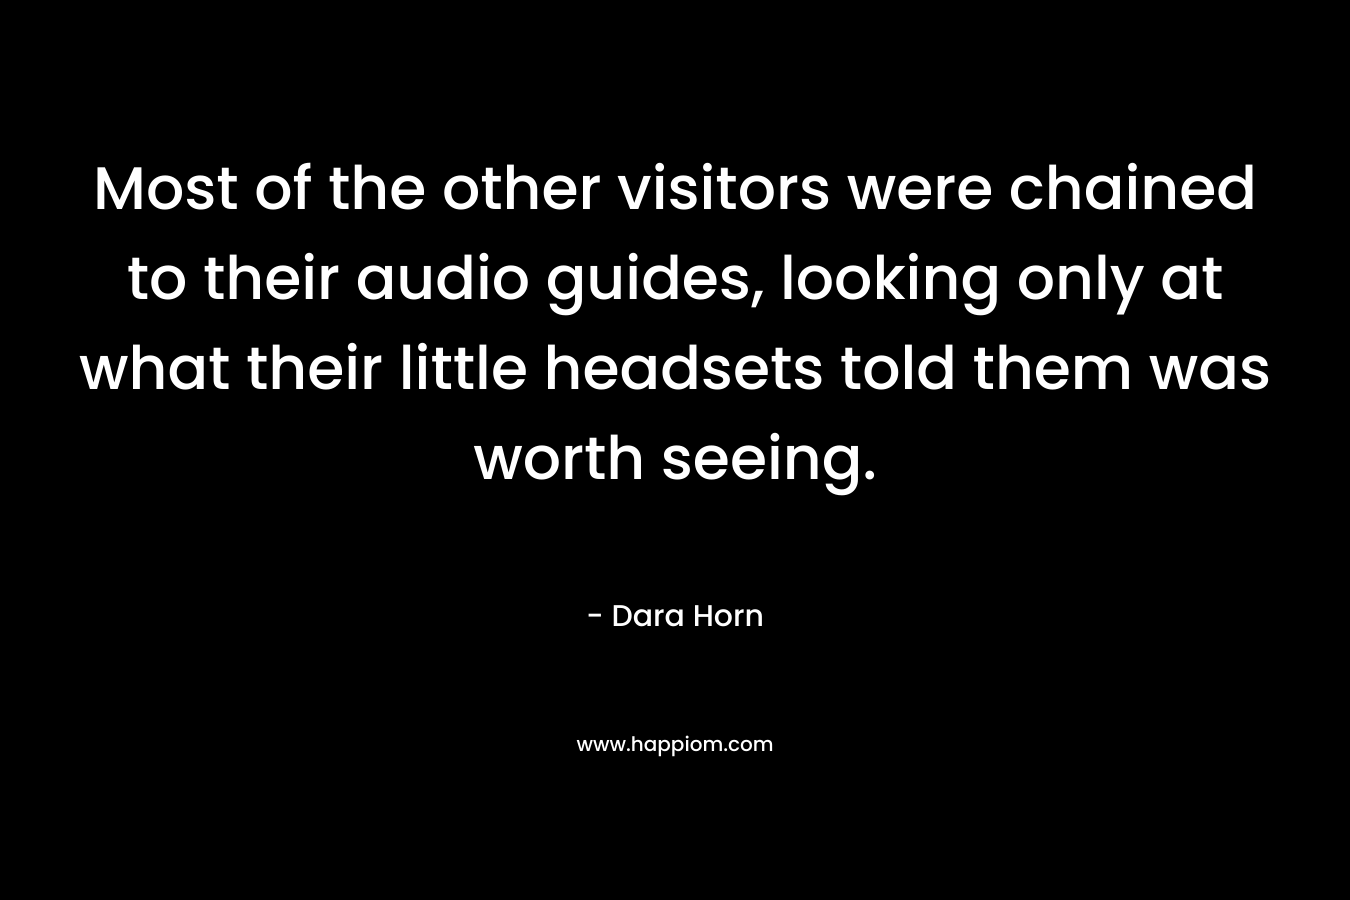 Most of the other visitors were chained to their audio guides, looking only at what their little headsets told them was worth seeing. – Dara Horn